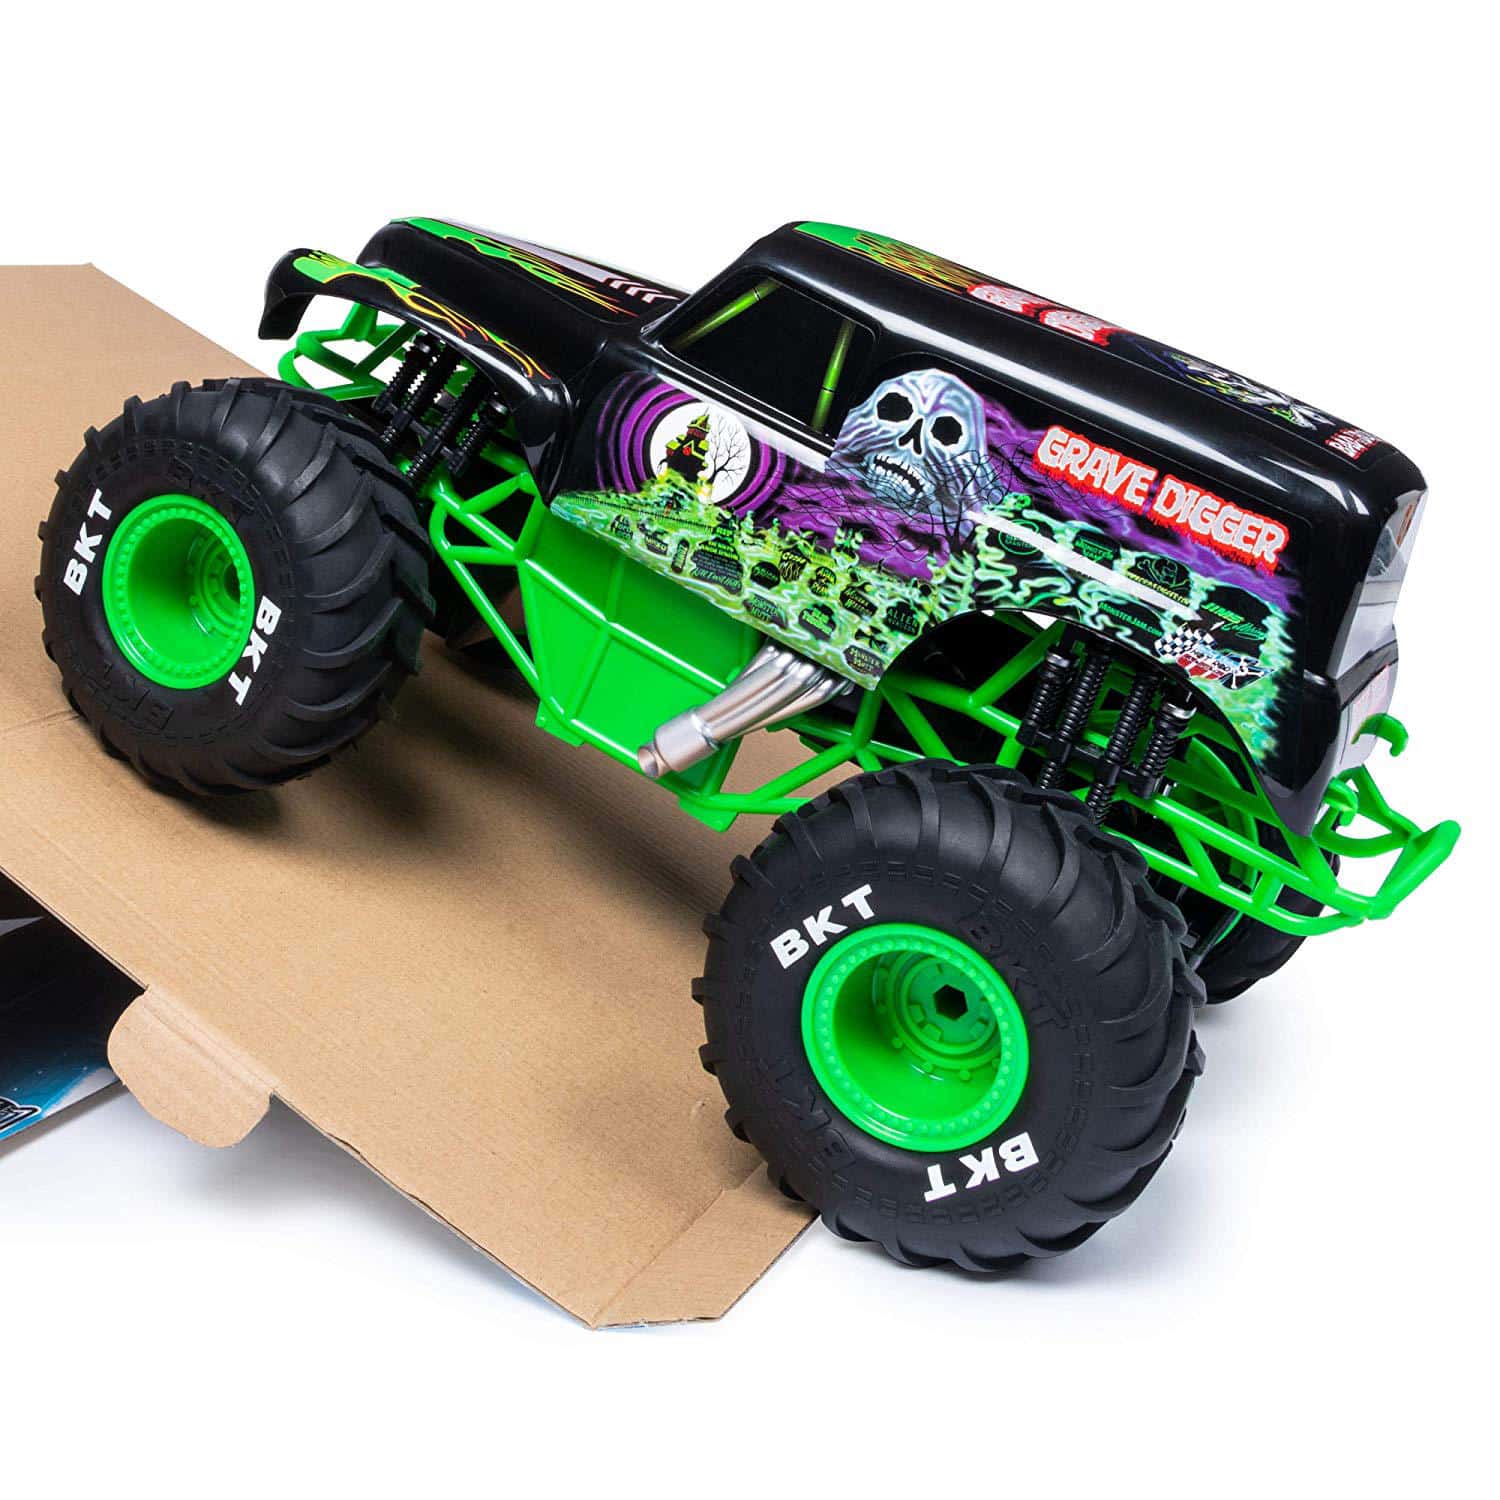 Monster Jam Monster Trucks Review The Rc Truck You Always Wanted